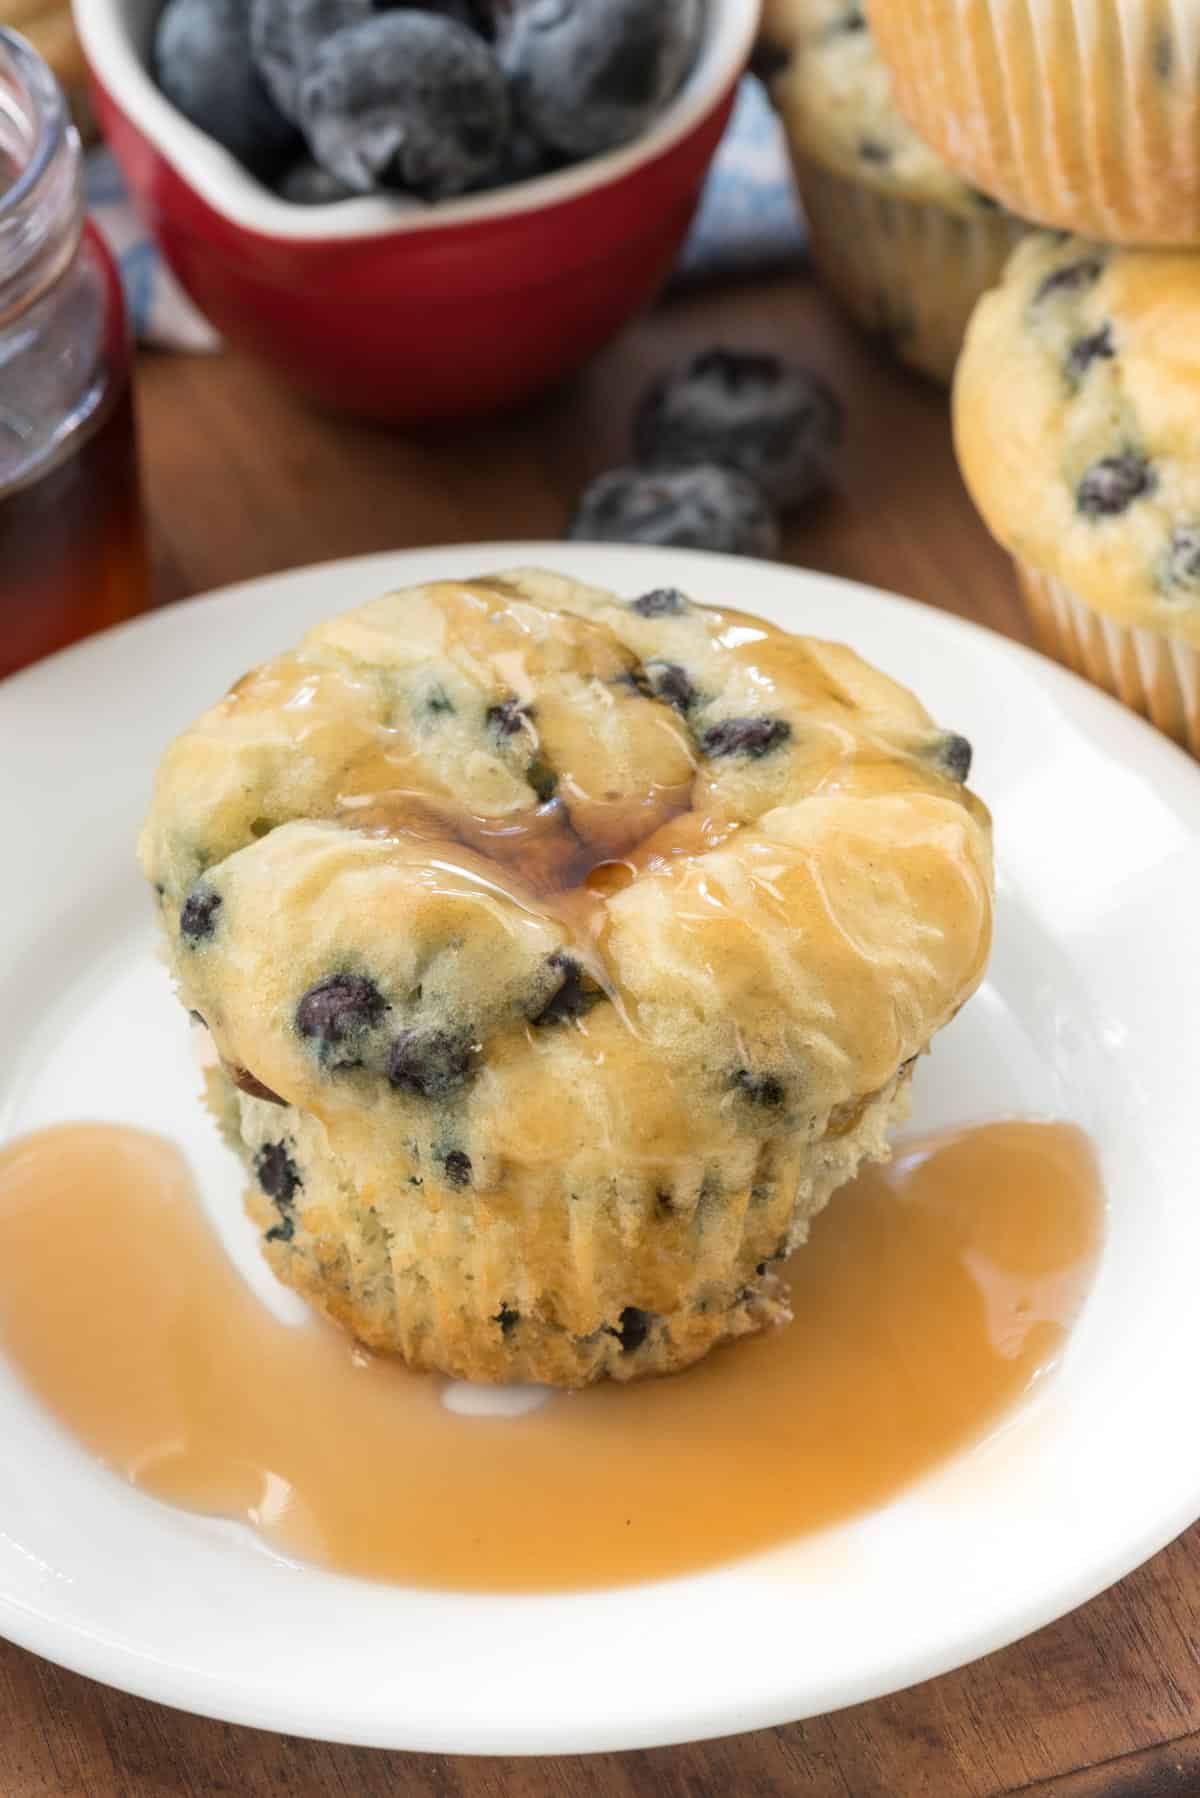 muffin on a white plate with syrup and blueberries baked in.